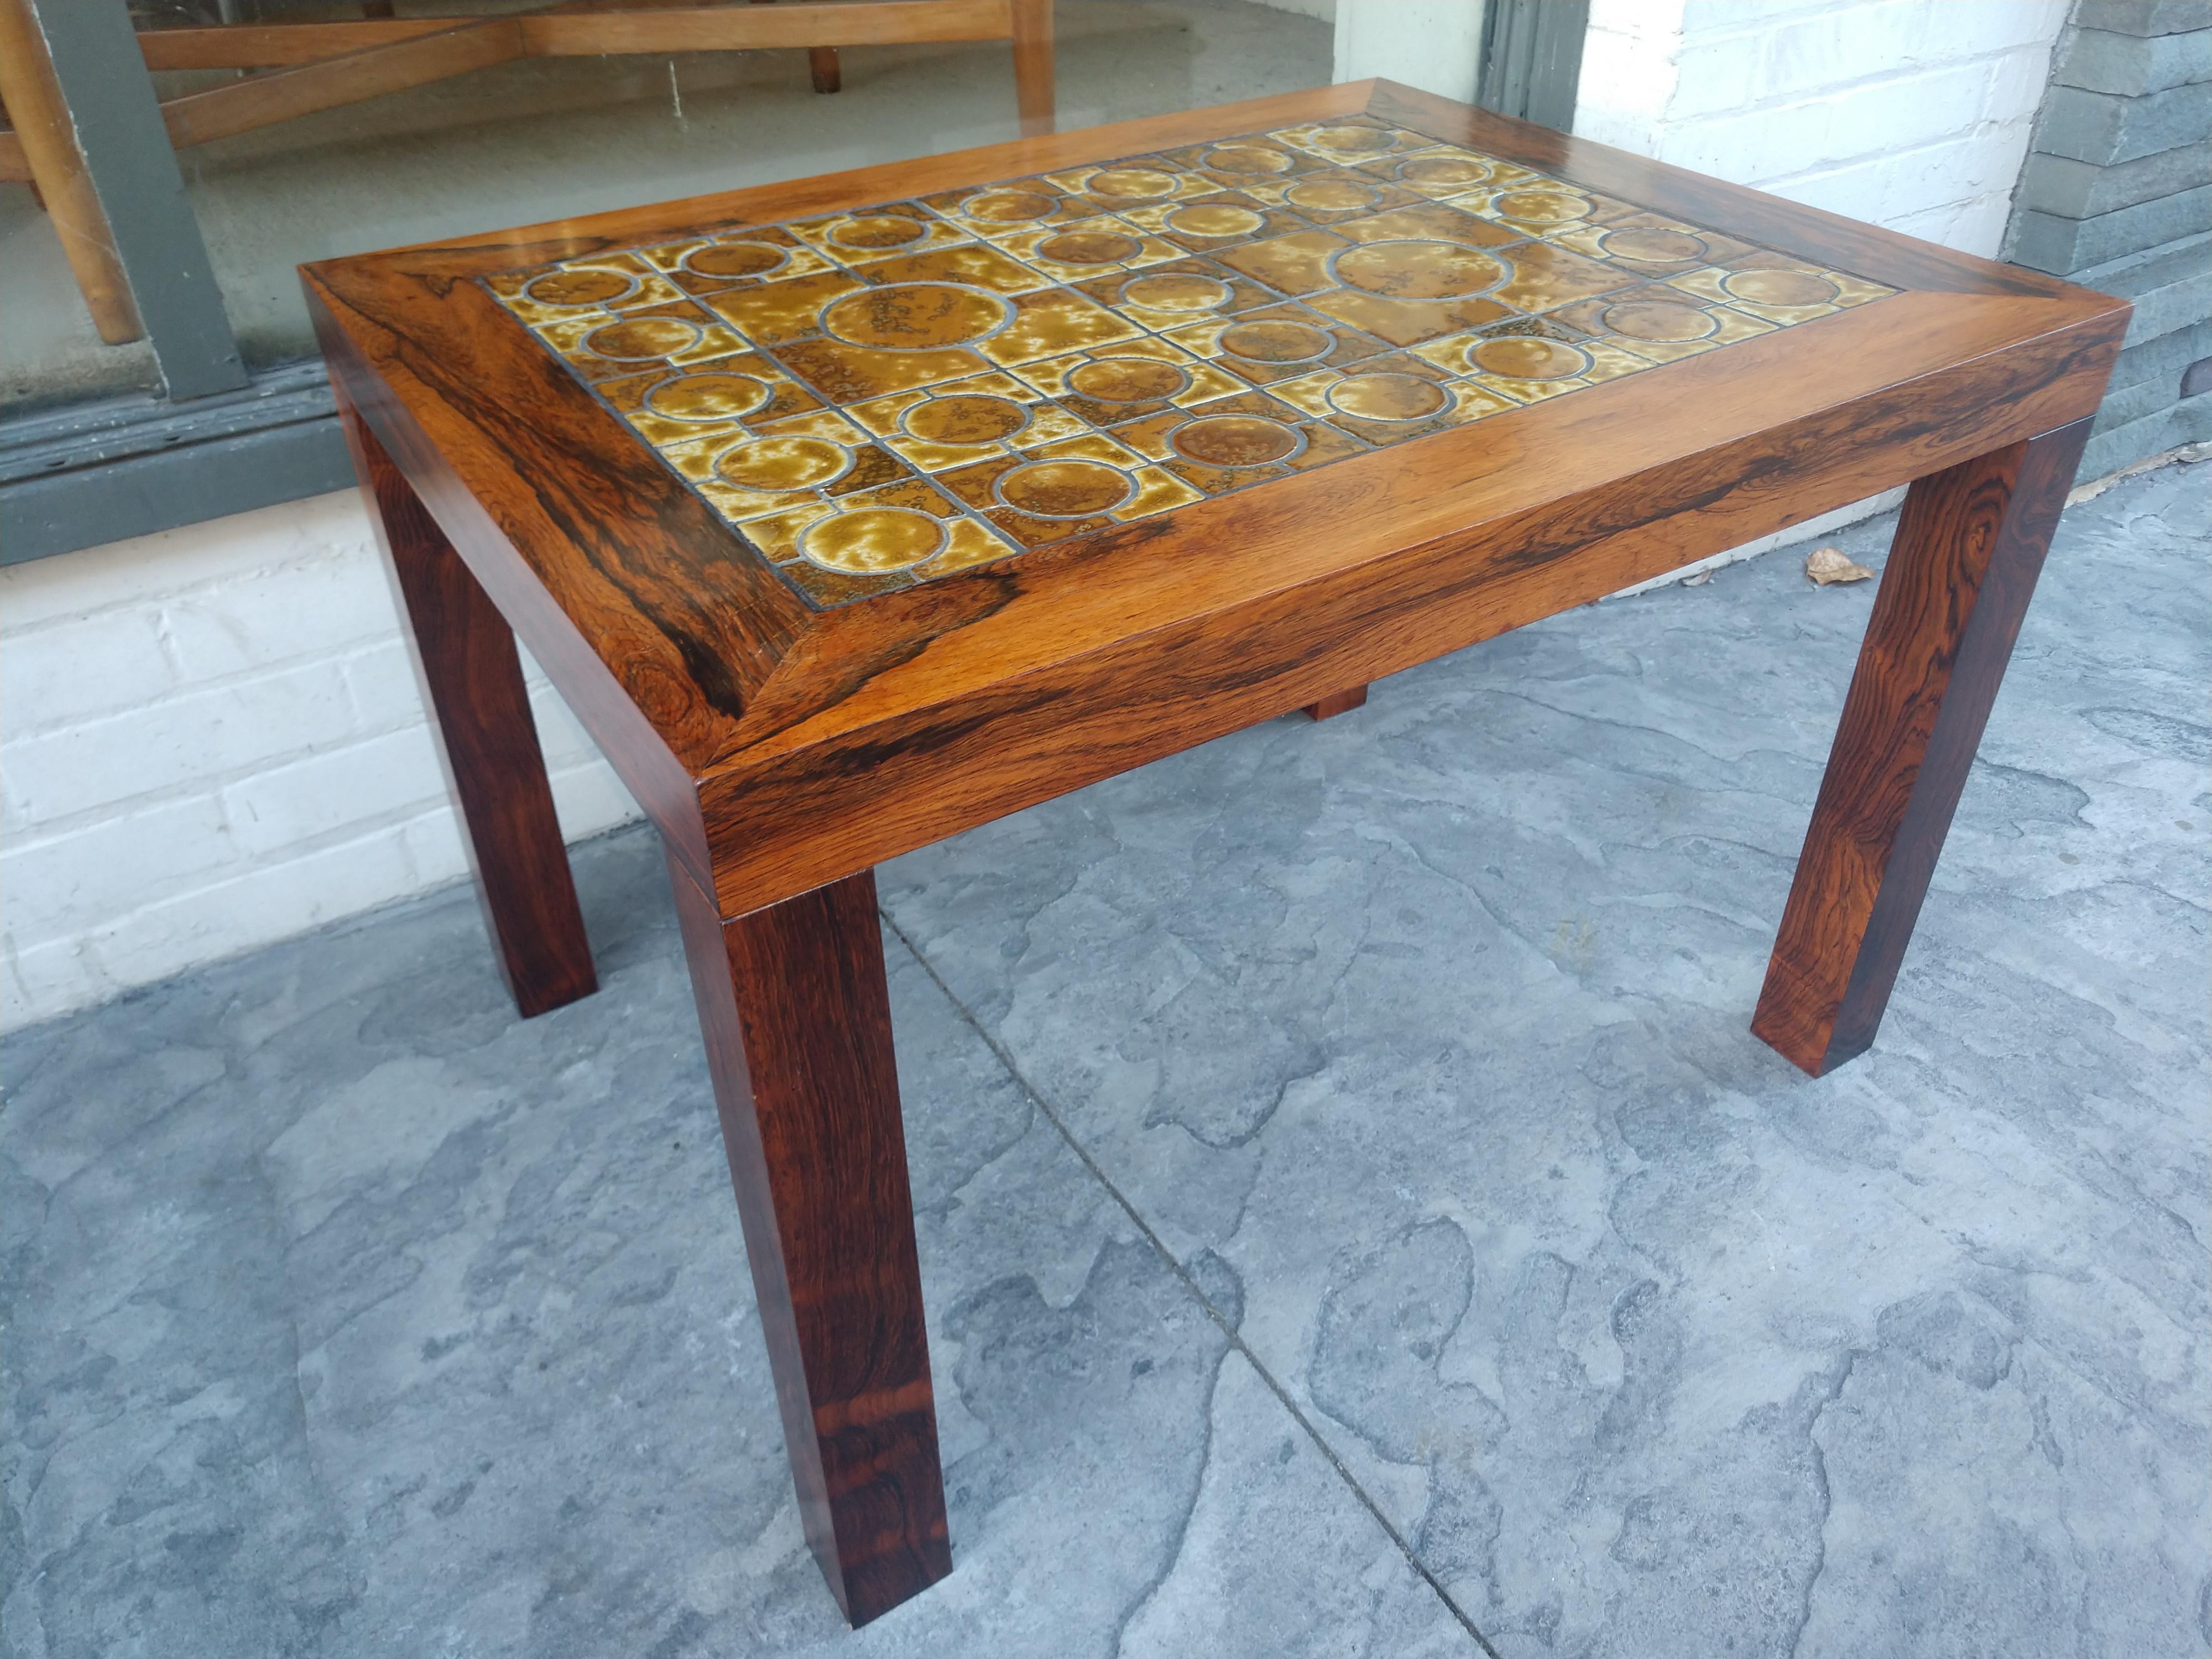 Pair of Mid Century Danish Modern Rosewood End Tables with Inset Tile Tops For Sale 2